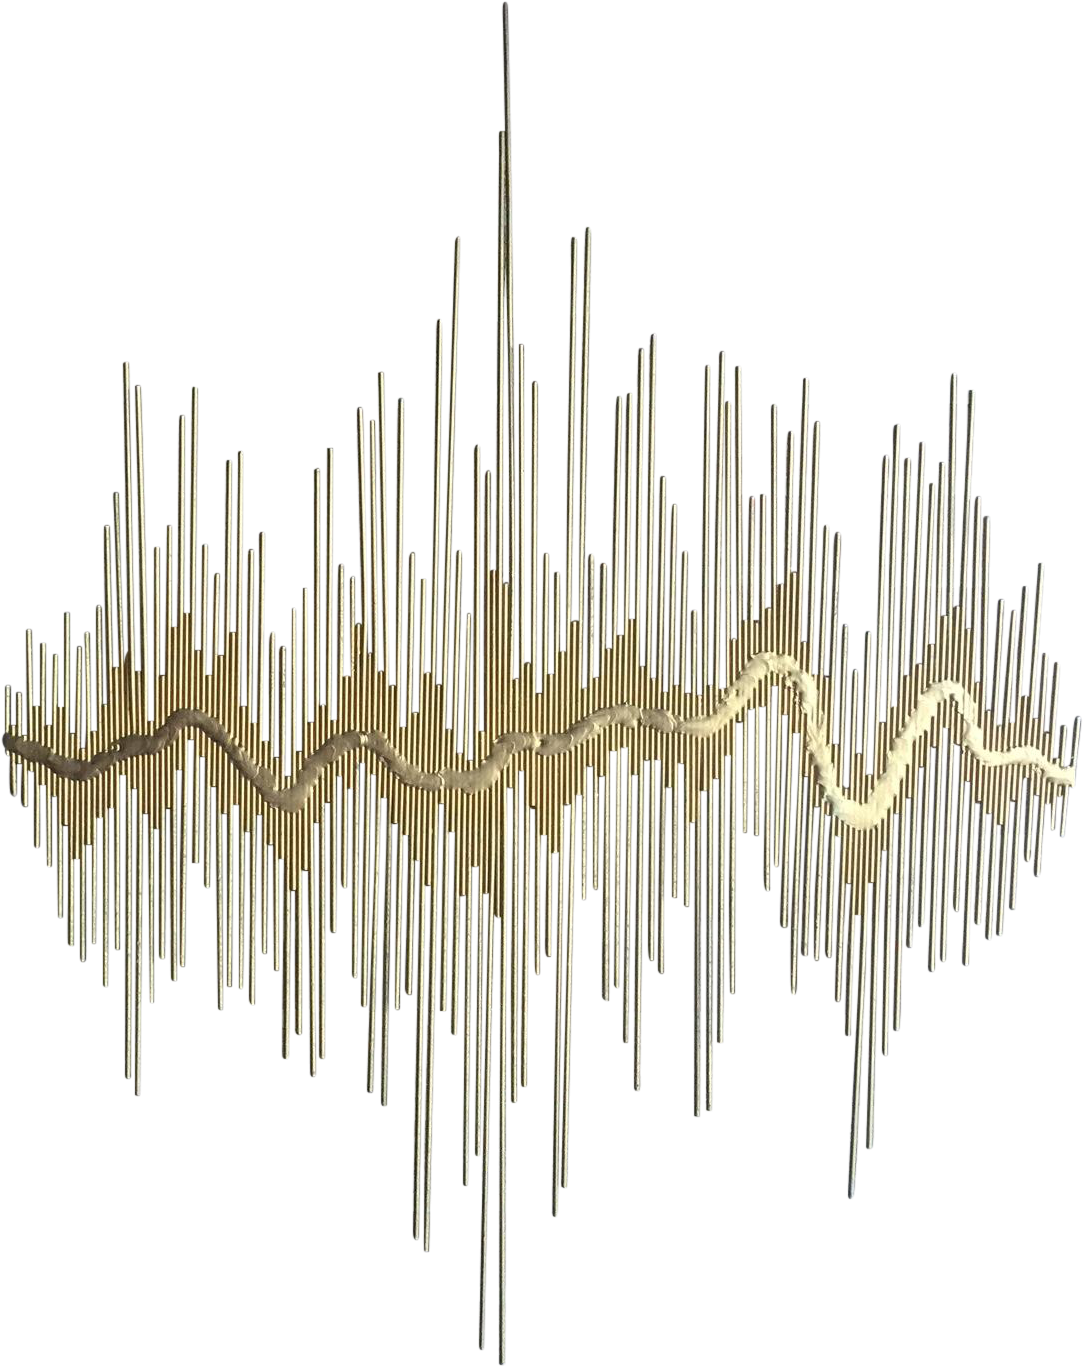 A Sound Waveform With Lines